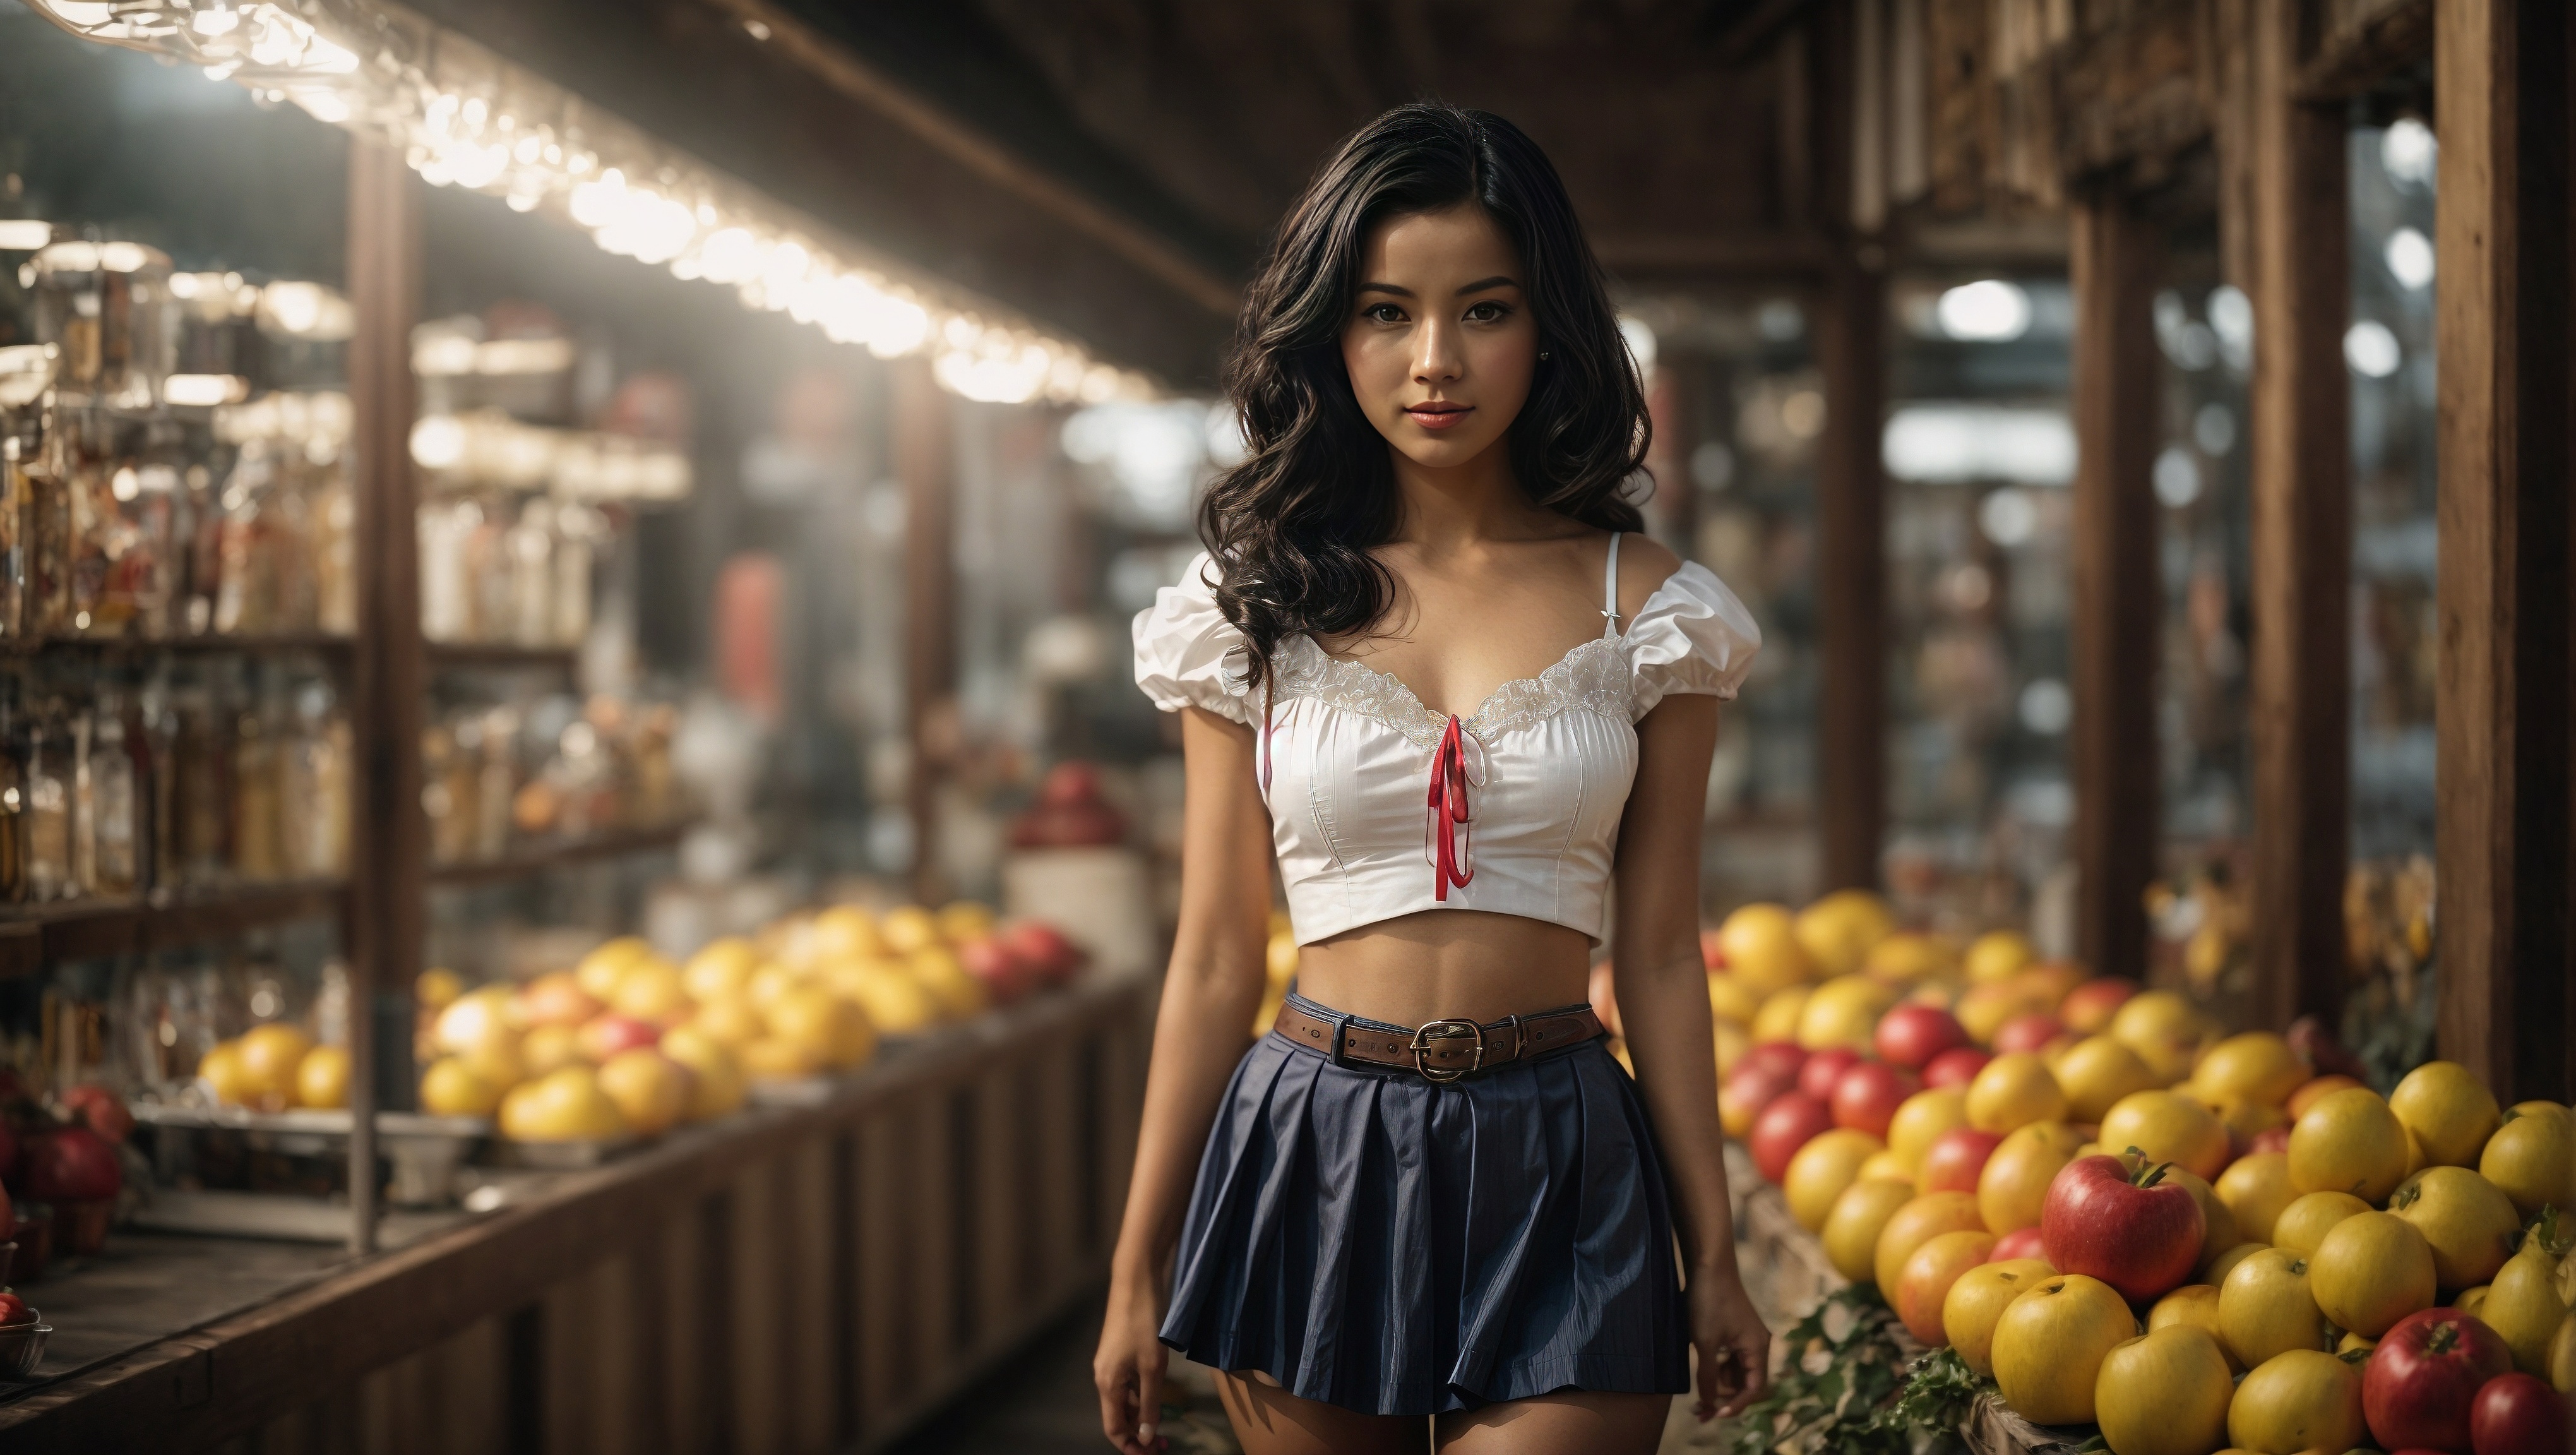 Free photo A woman in blue skirt and crop top posing in front of fruit display